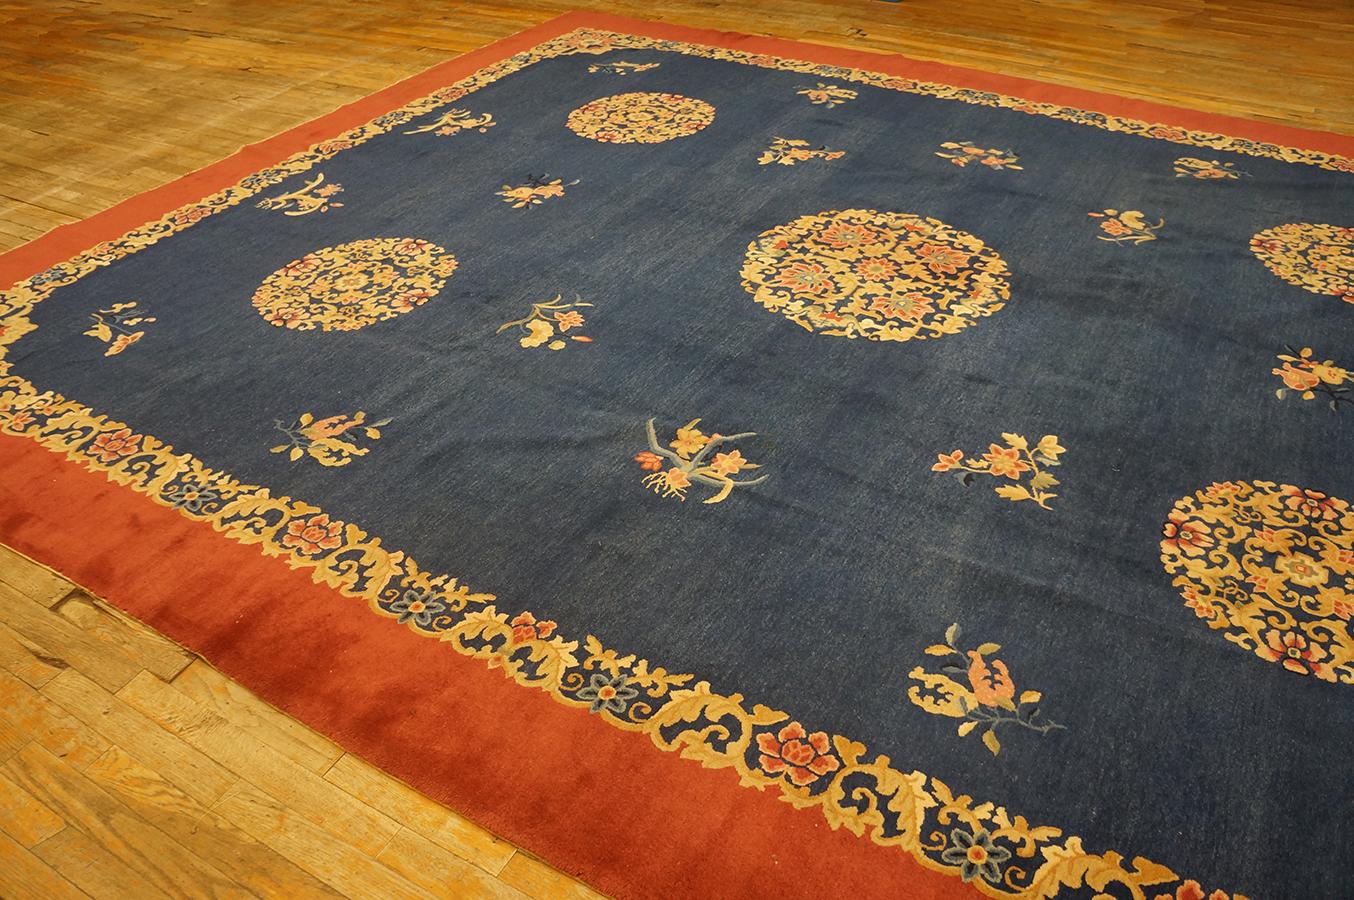 Early 20th Century Chinese Peking Carpet ( 11' x 13'6'' - 335 x 412 ) For Sale 1